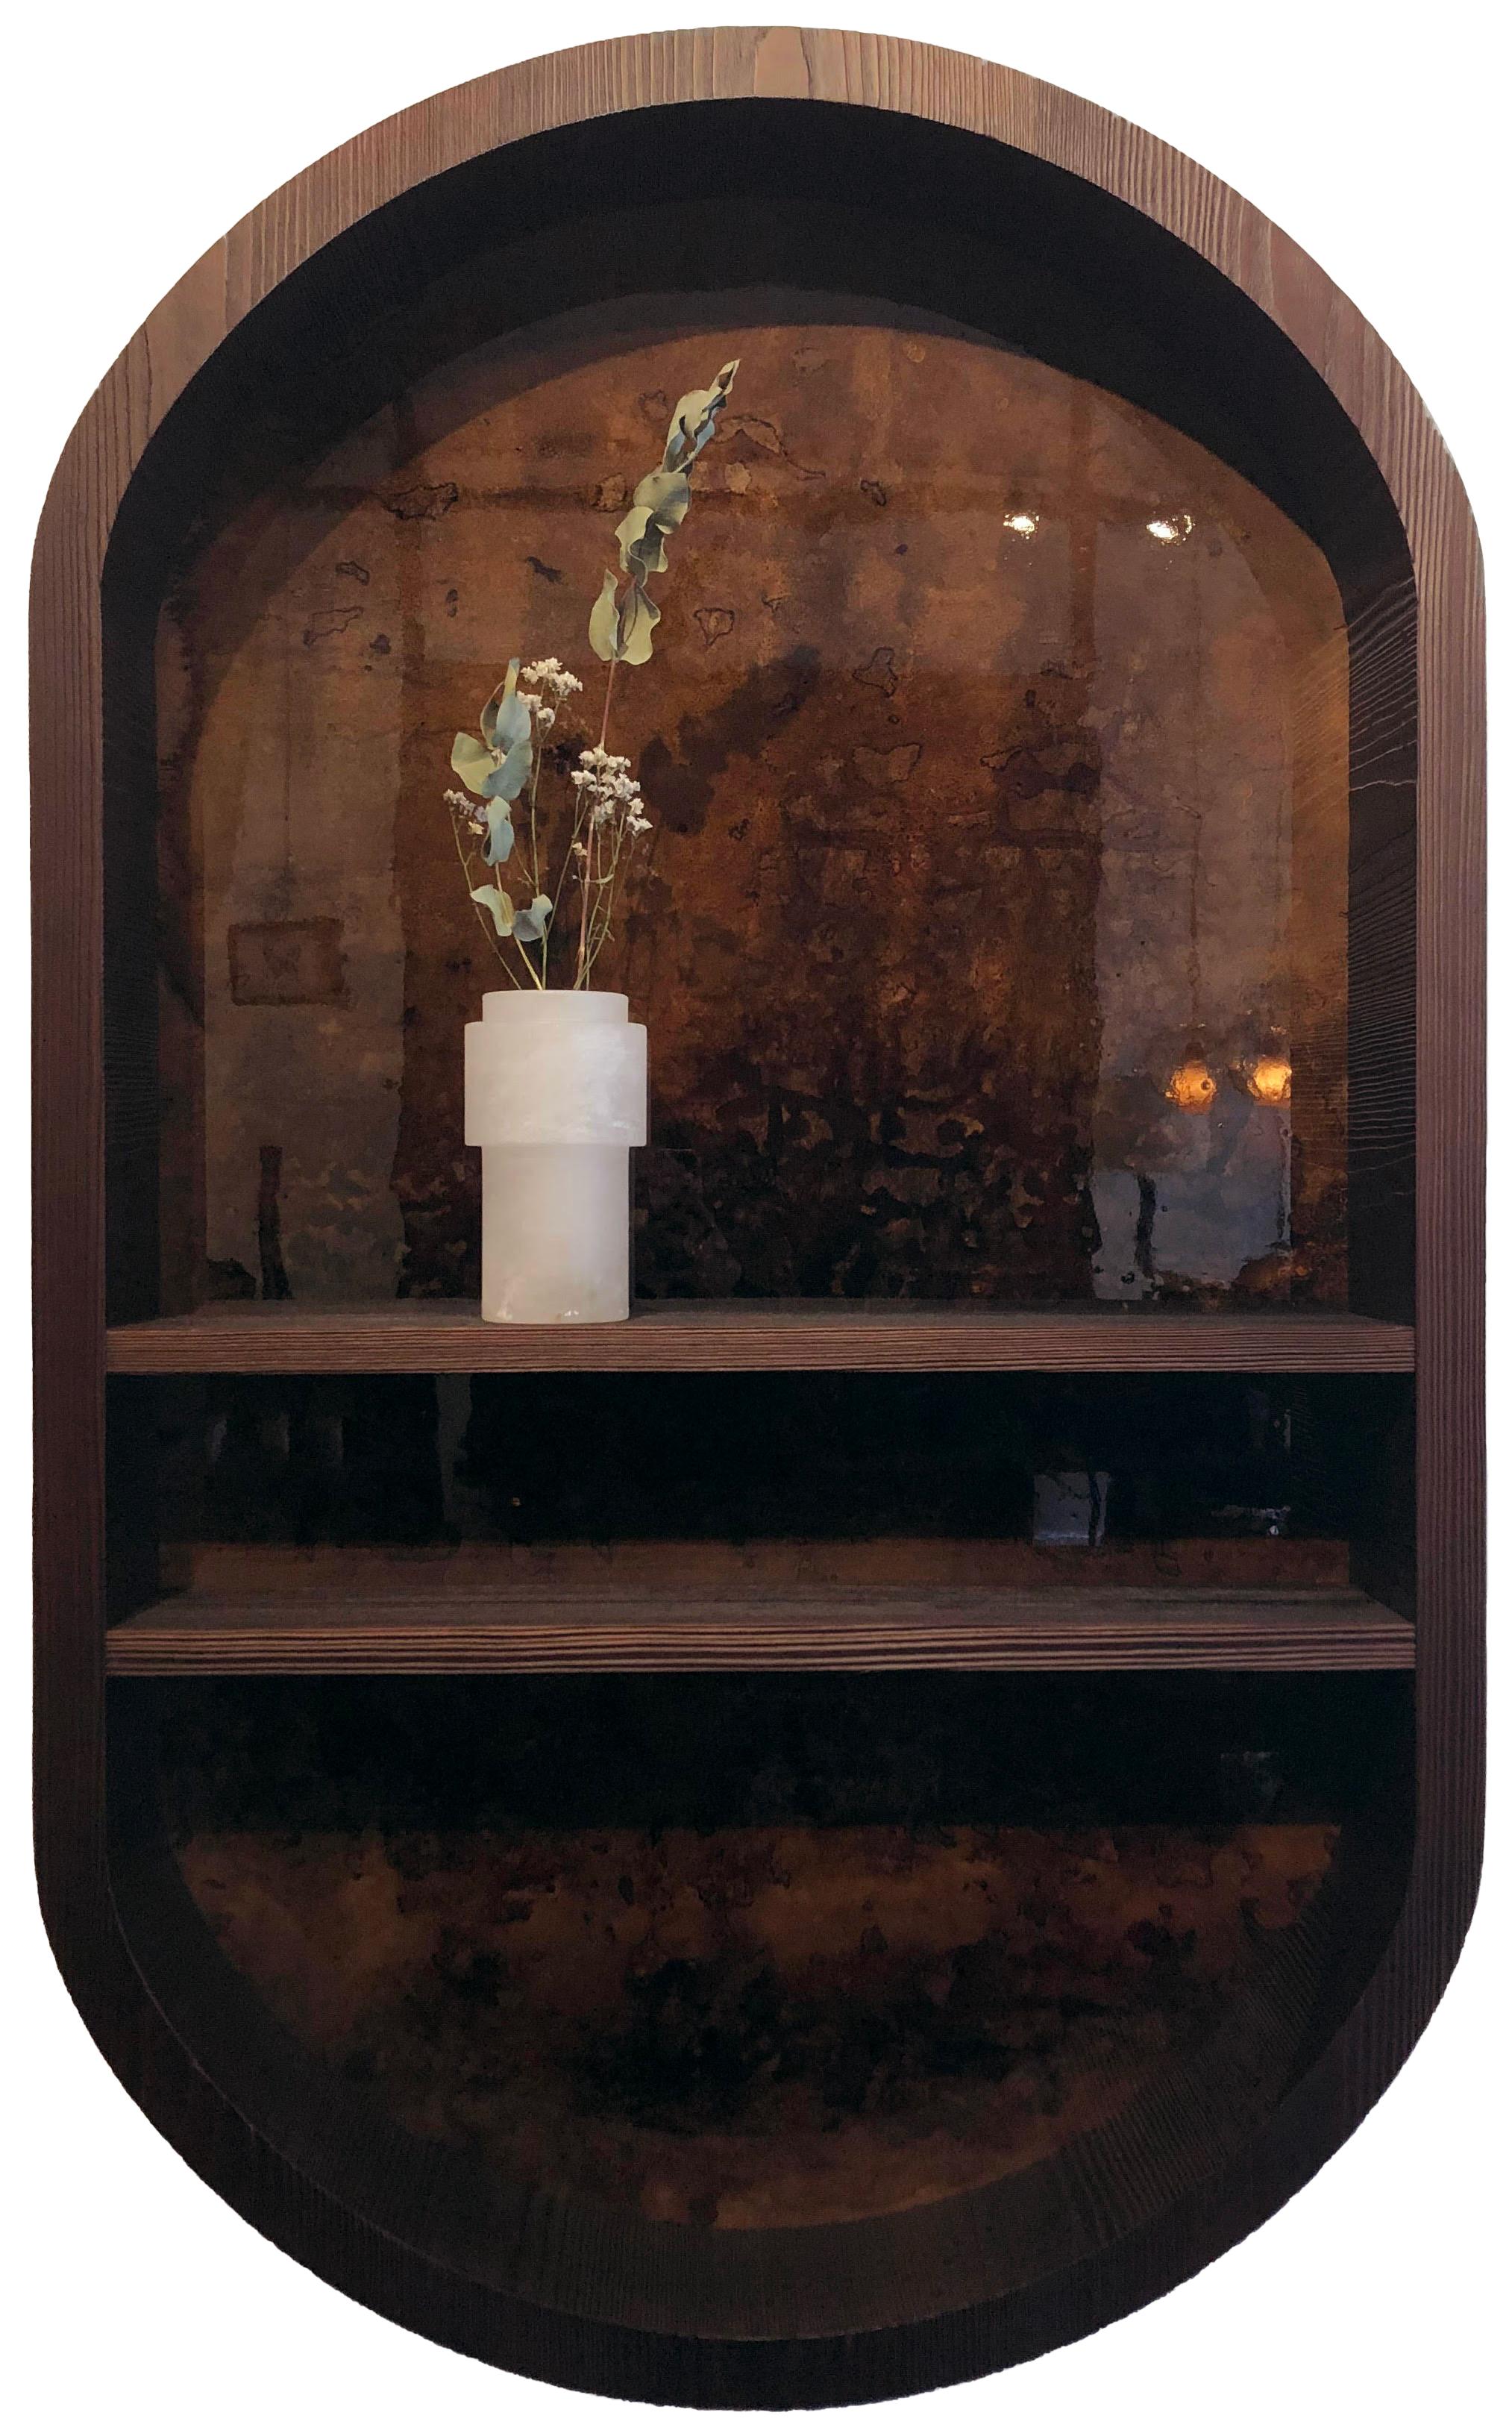 This low arched wall bookcase is made of sandblasted pine on lacquer panel. This piece created in 2020 is the result of a collaboration between the Atelier Linné for it’s cabinet work and Denis Perrollaz who made the lacquer panel.

Atelier Linné is